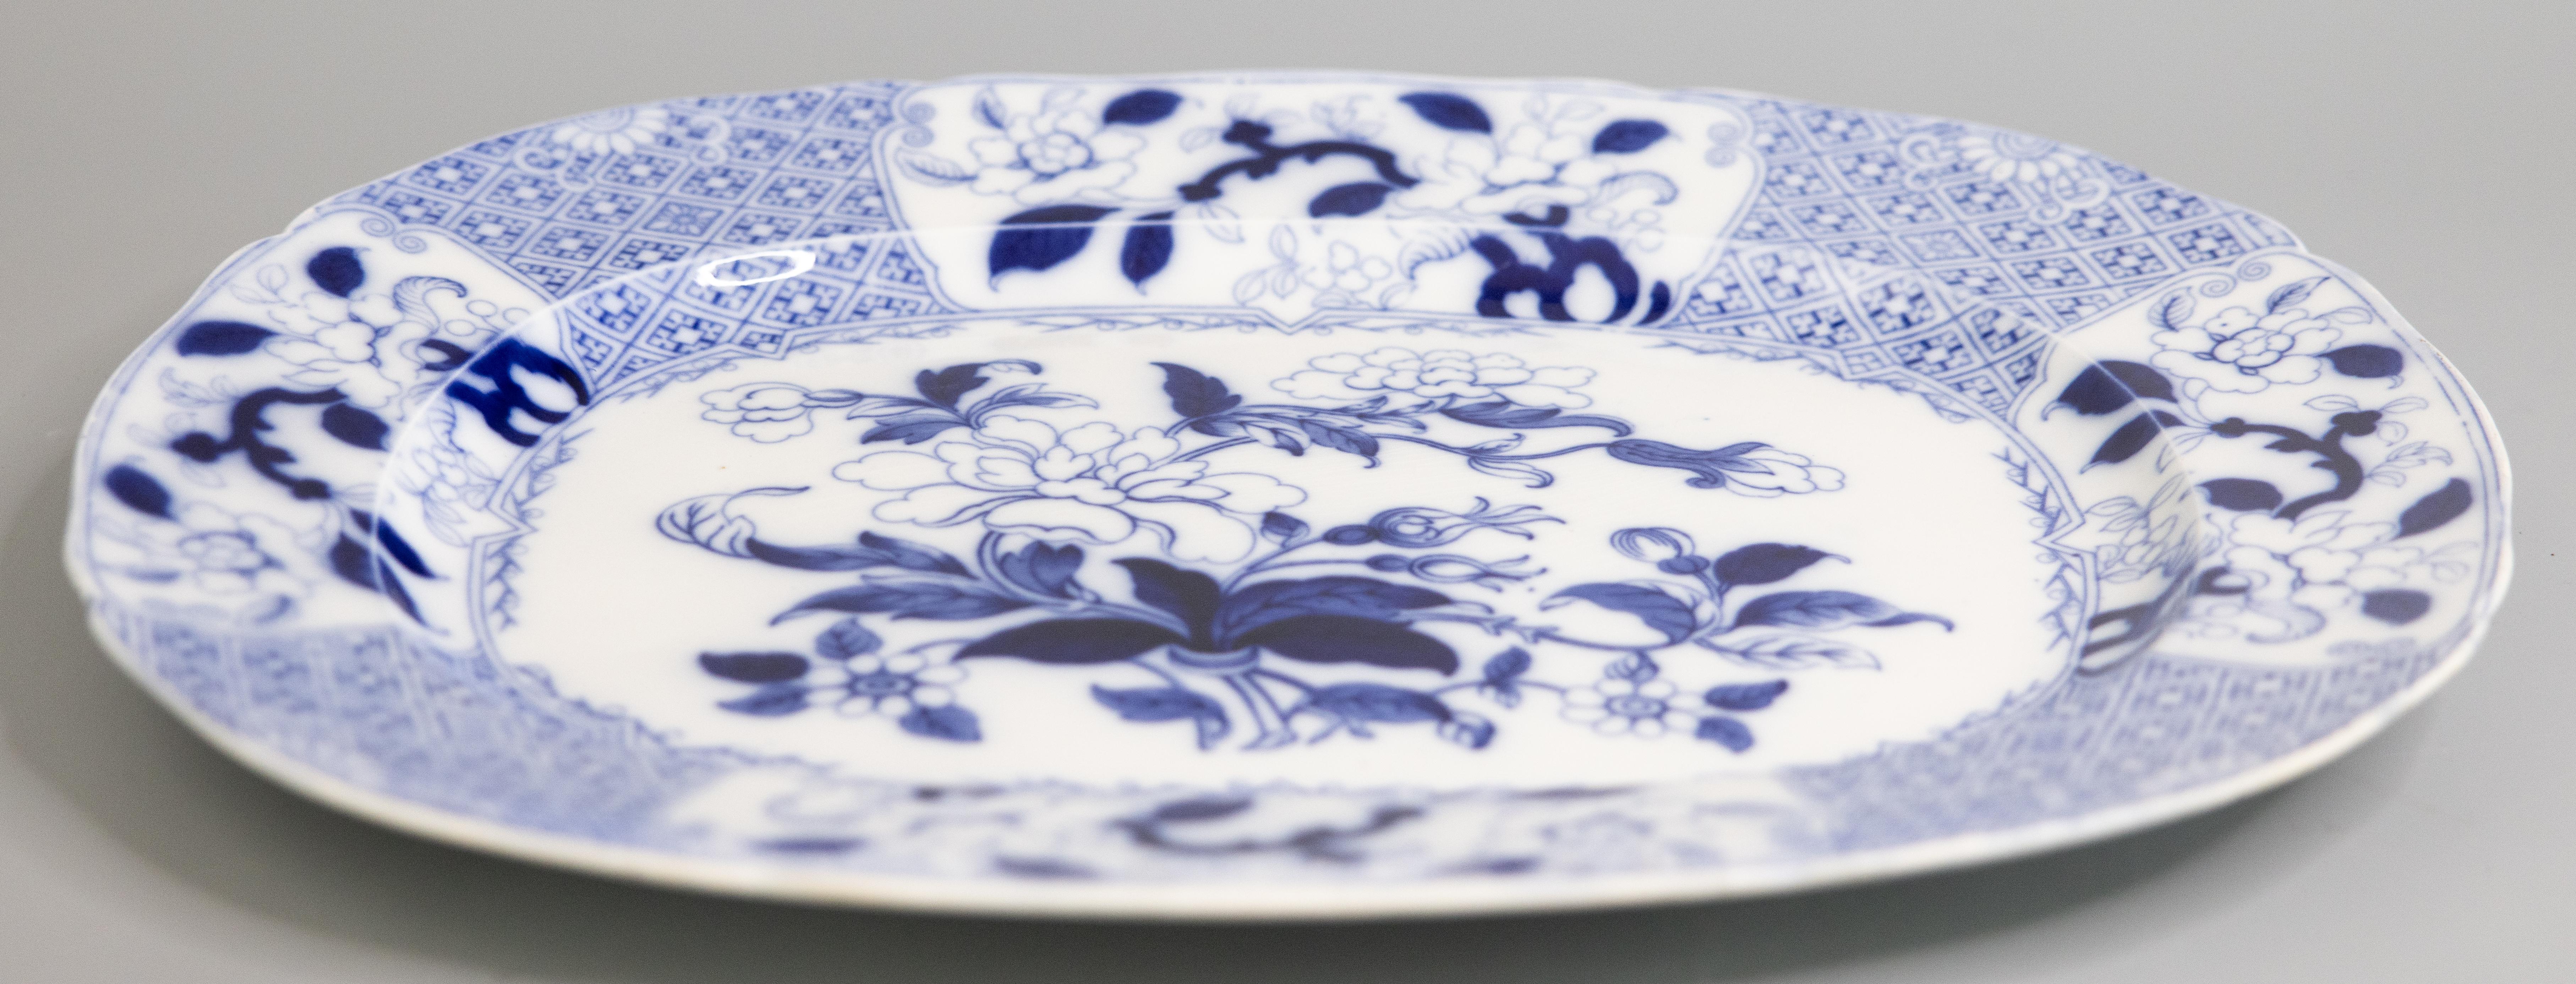 A gorgeous antique 19th-Century English Minton flow blue transferware ironstone serving platter, circa 1840. Maker's marks on reverse. This beautiful platter is a nice large size and heavy, weighing an impressive 7 lbs, with a lovely floral design